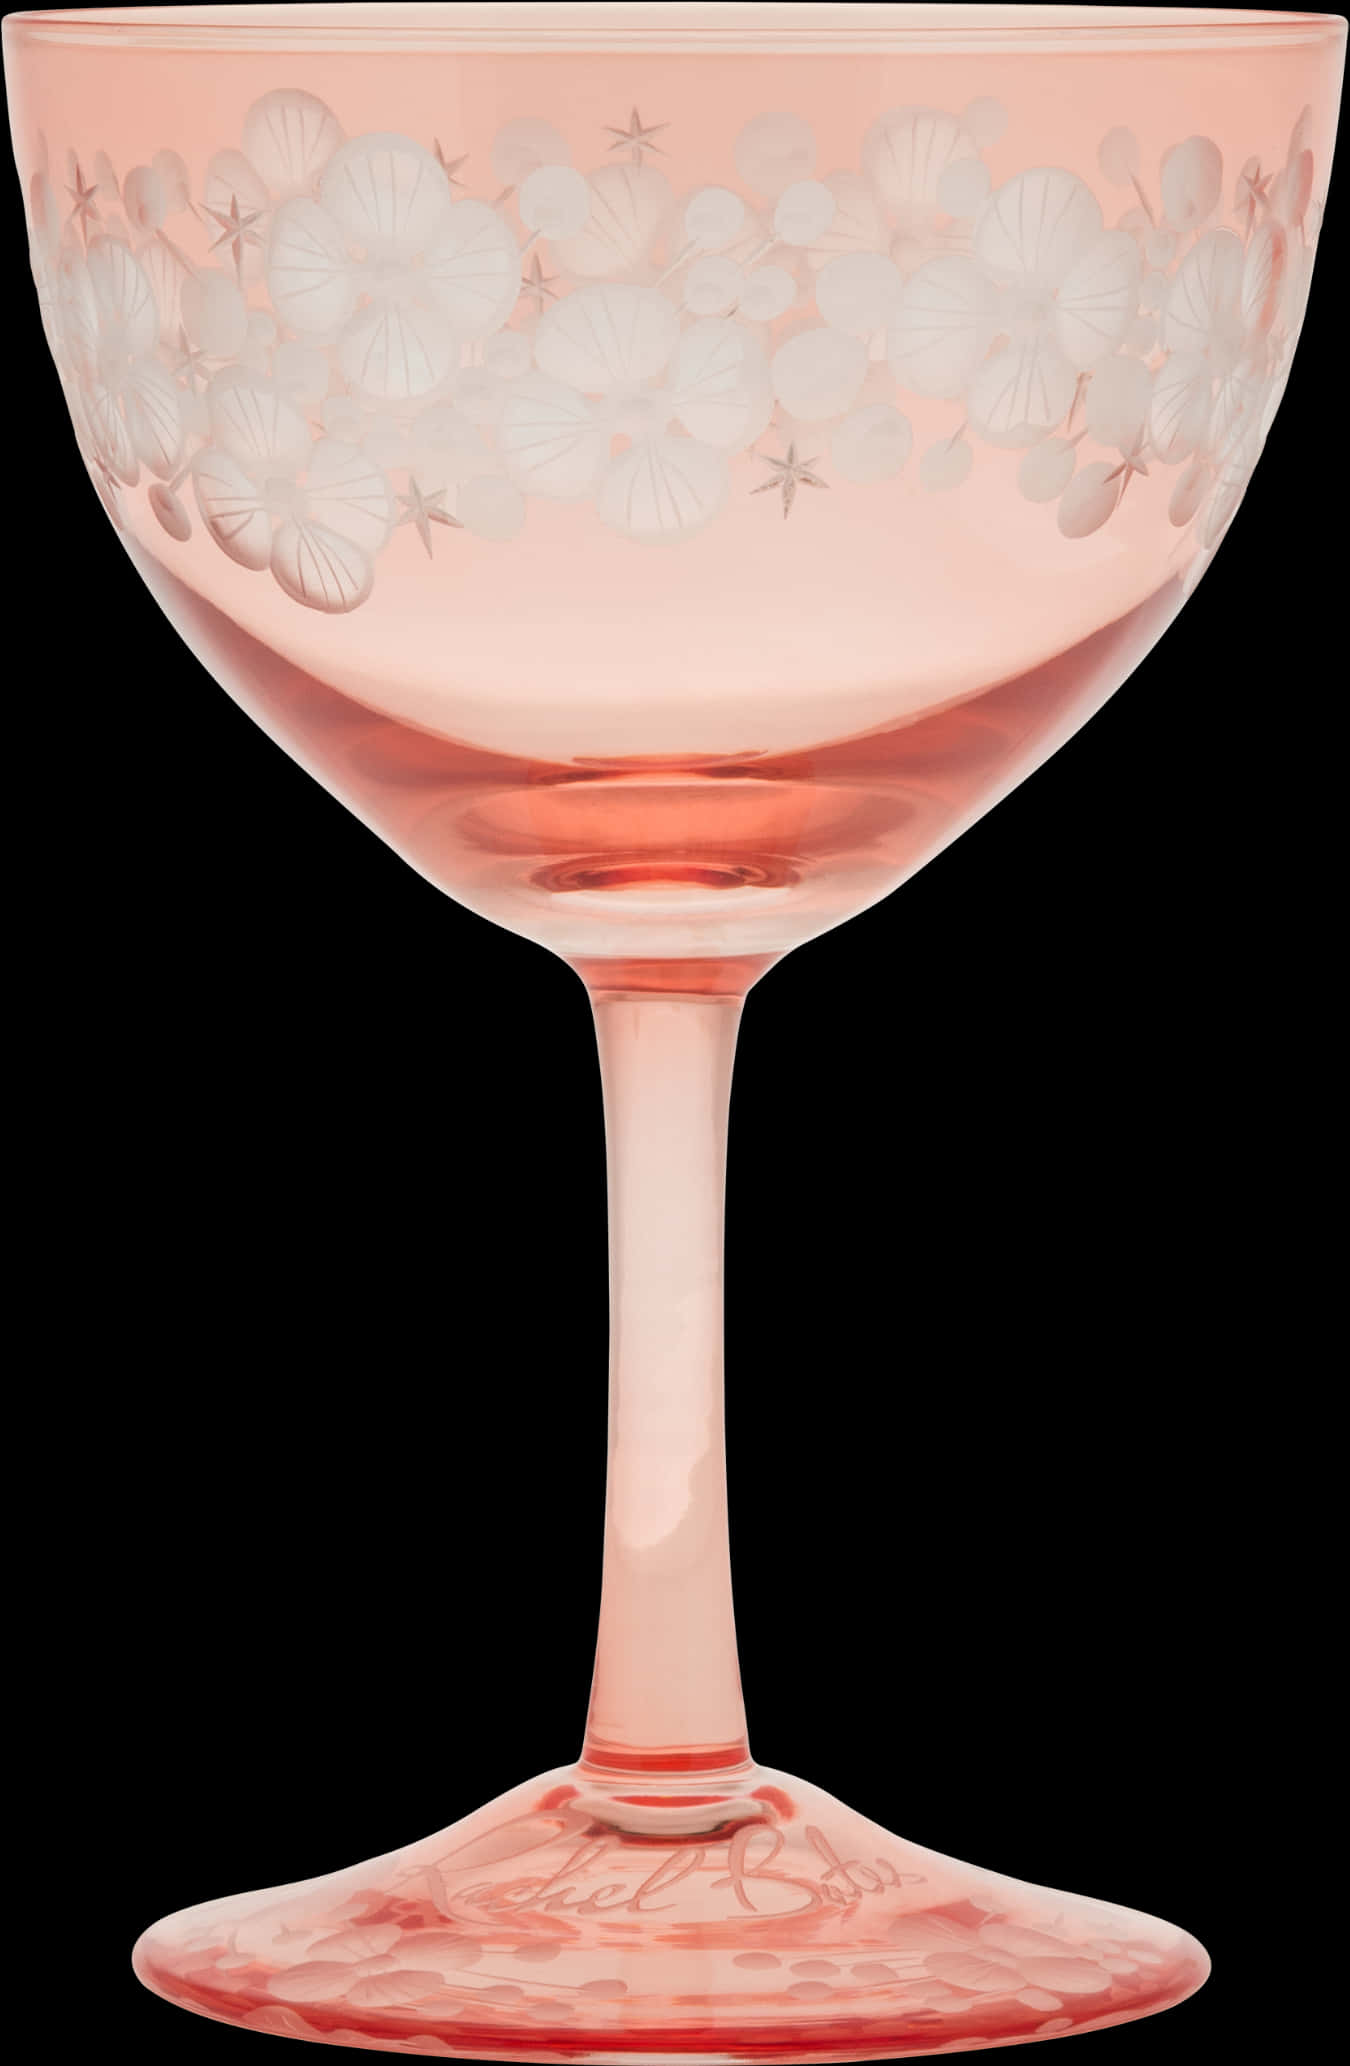 A Pink Wine Glass With White Flowers On It